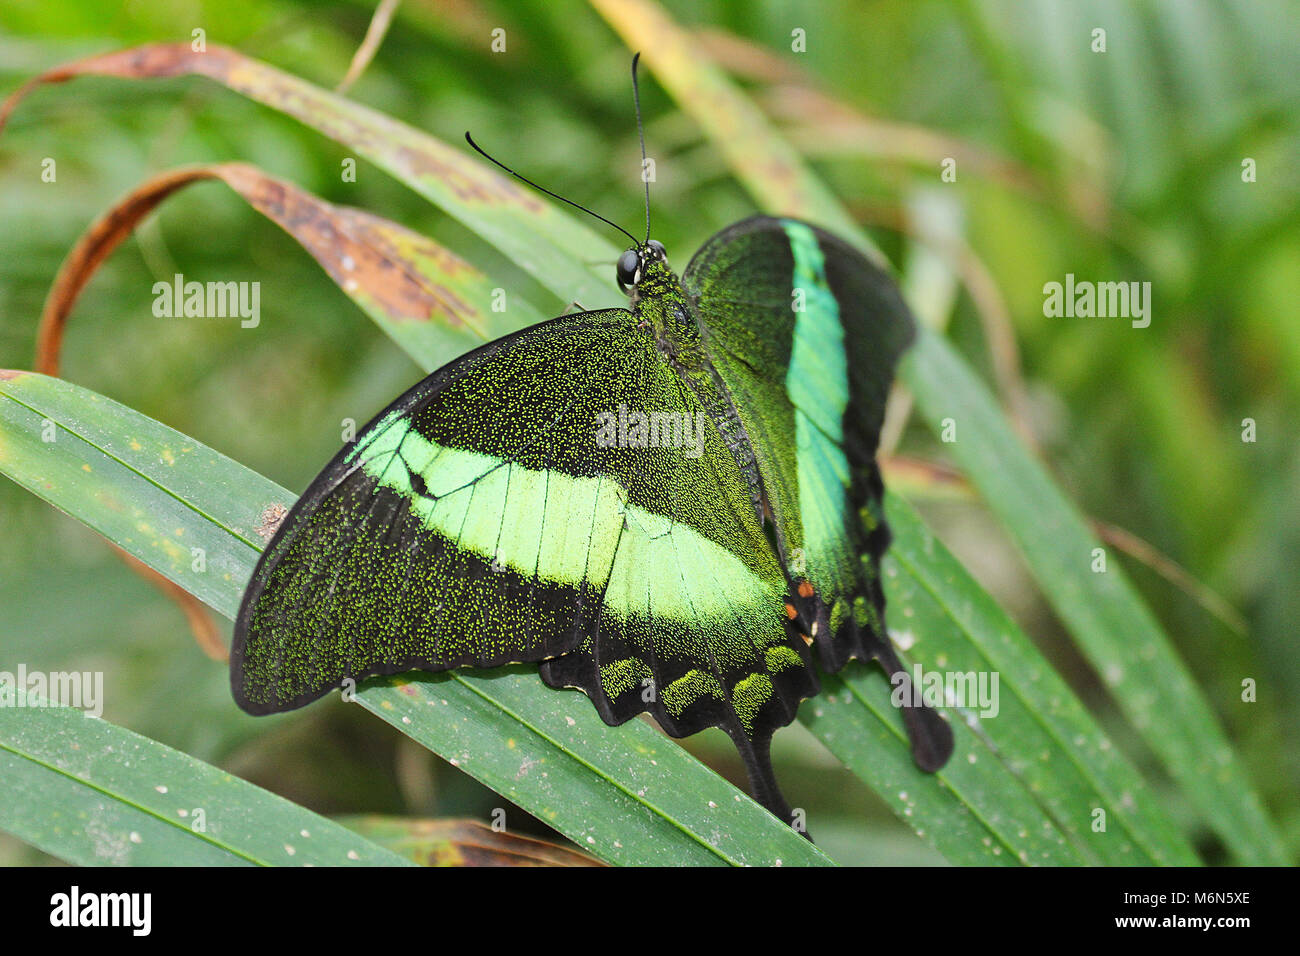 Big green butterfly Emerald Swallowtail from side, Papilio palinurus Stock Photo